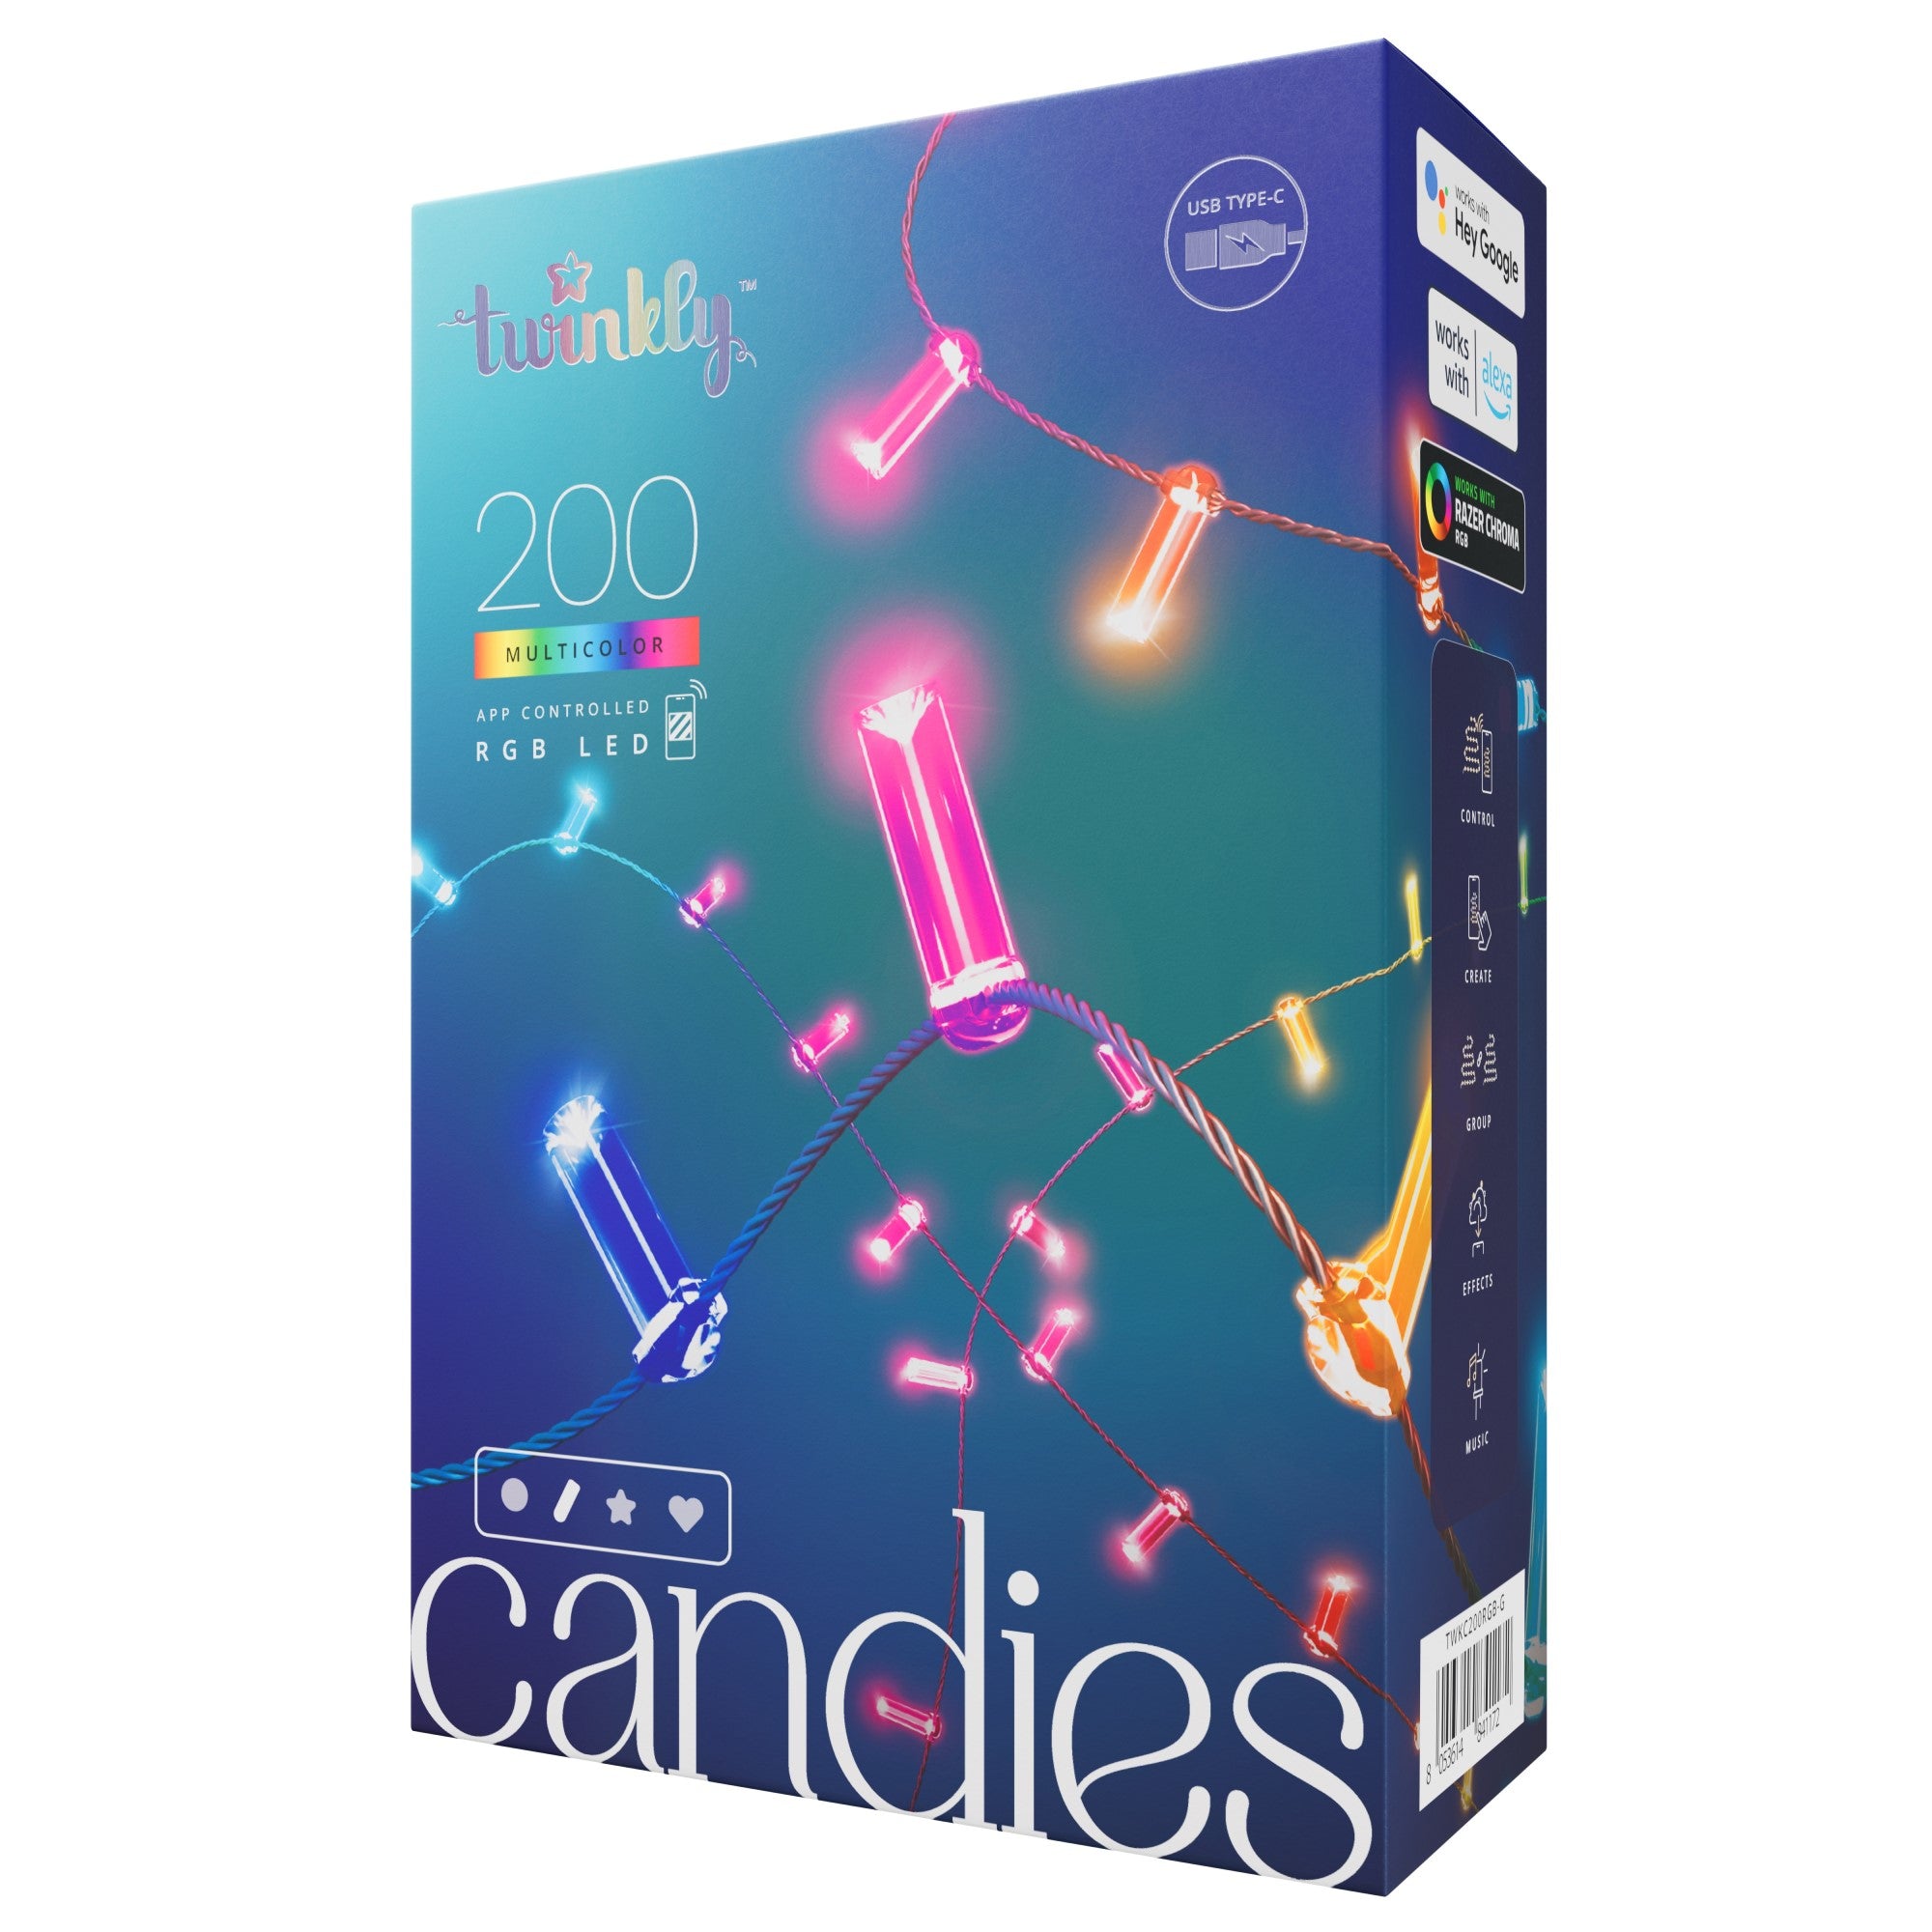 Twinkly Candies LED light chain RGB app controlled candle shape 200 LEDs